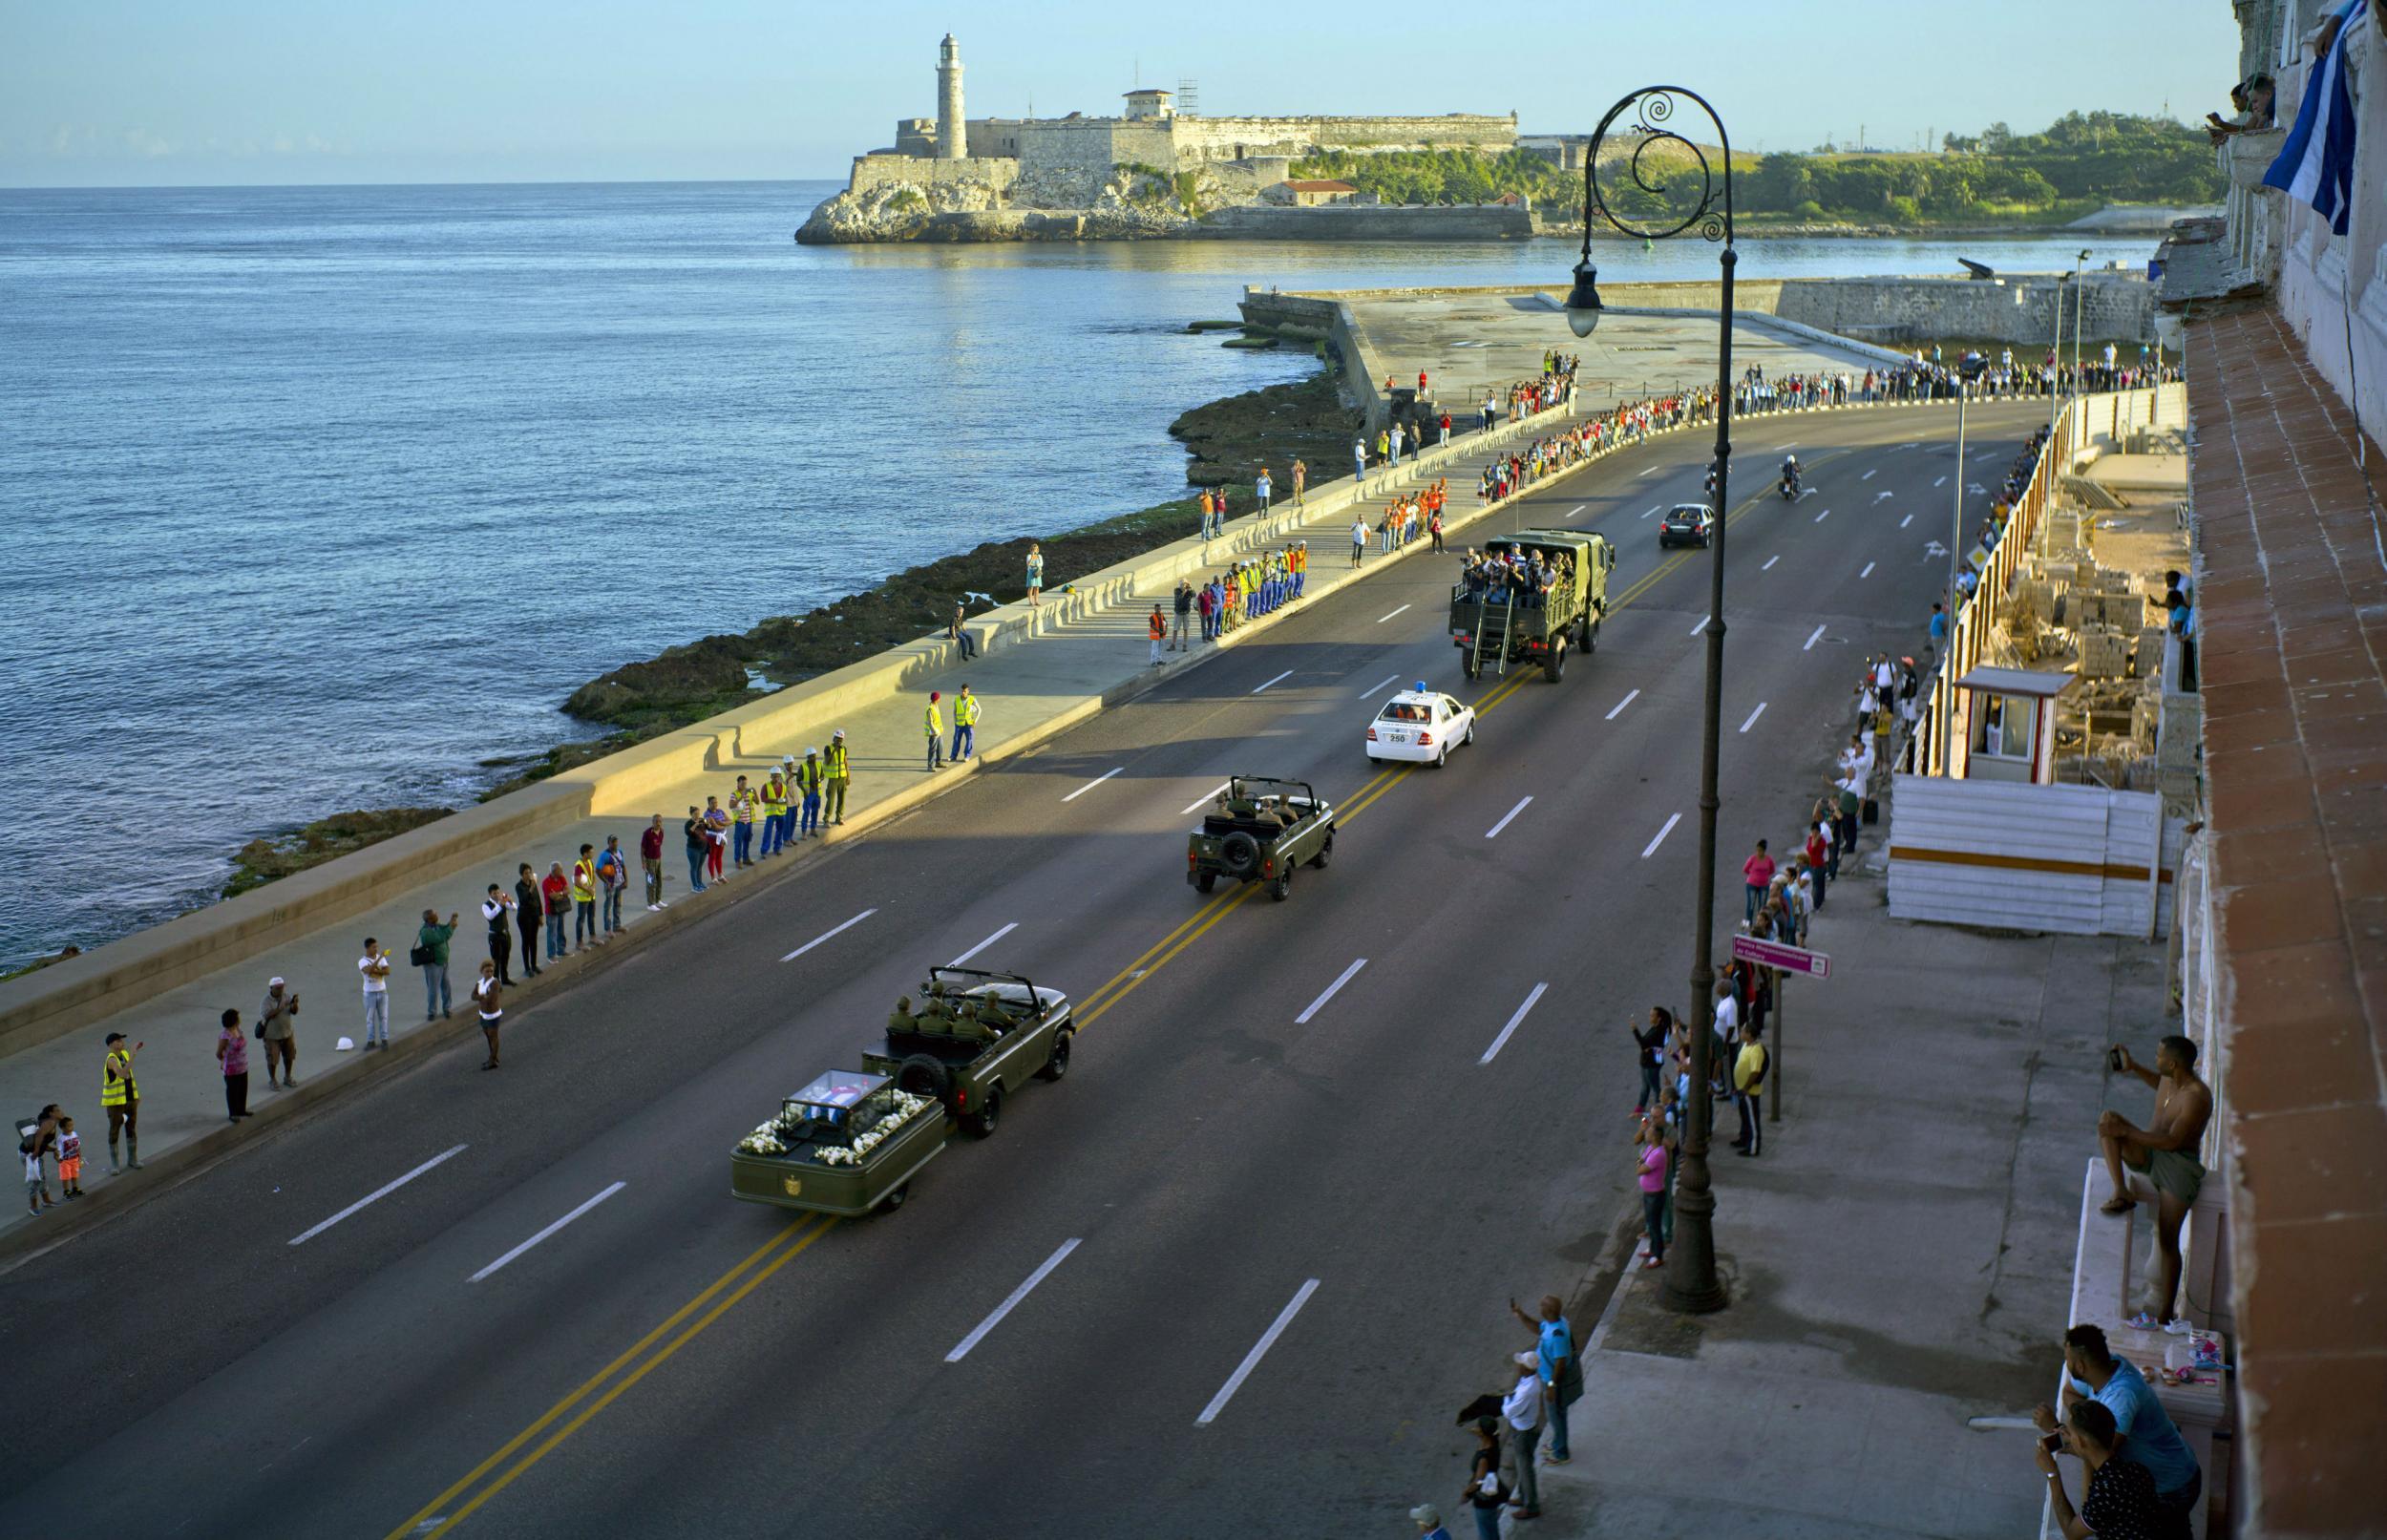 The Castro cortege begins its journey on Havana's Malecon early on Wednesday